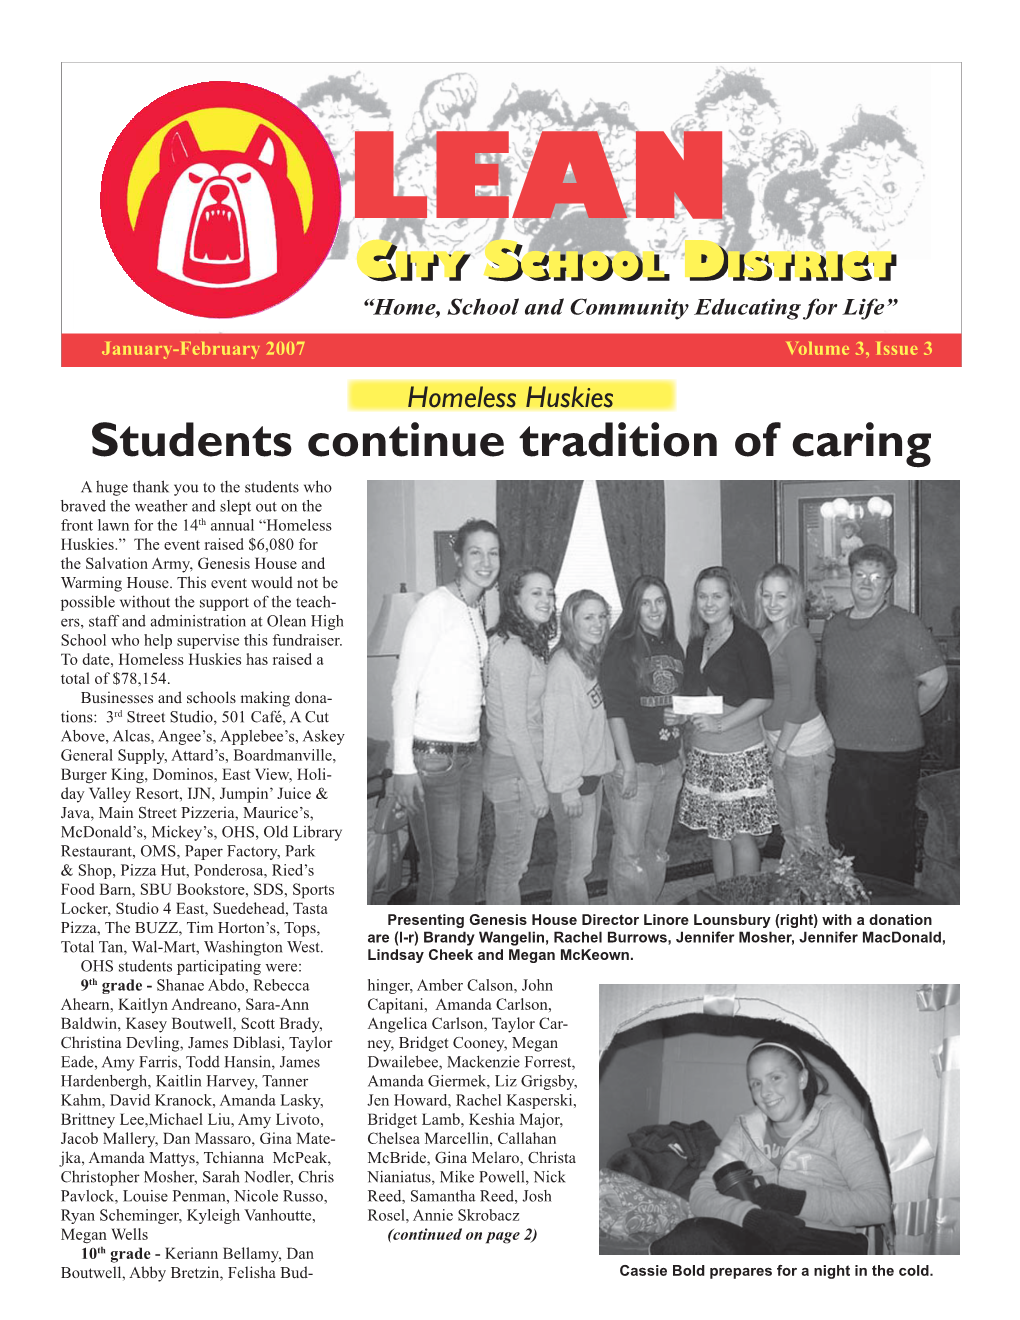 Students Continue Tradition of Caring